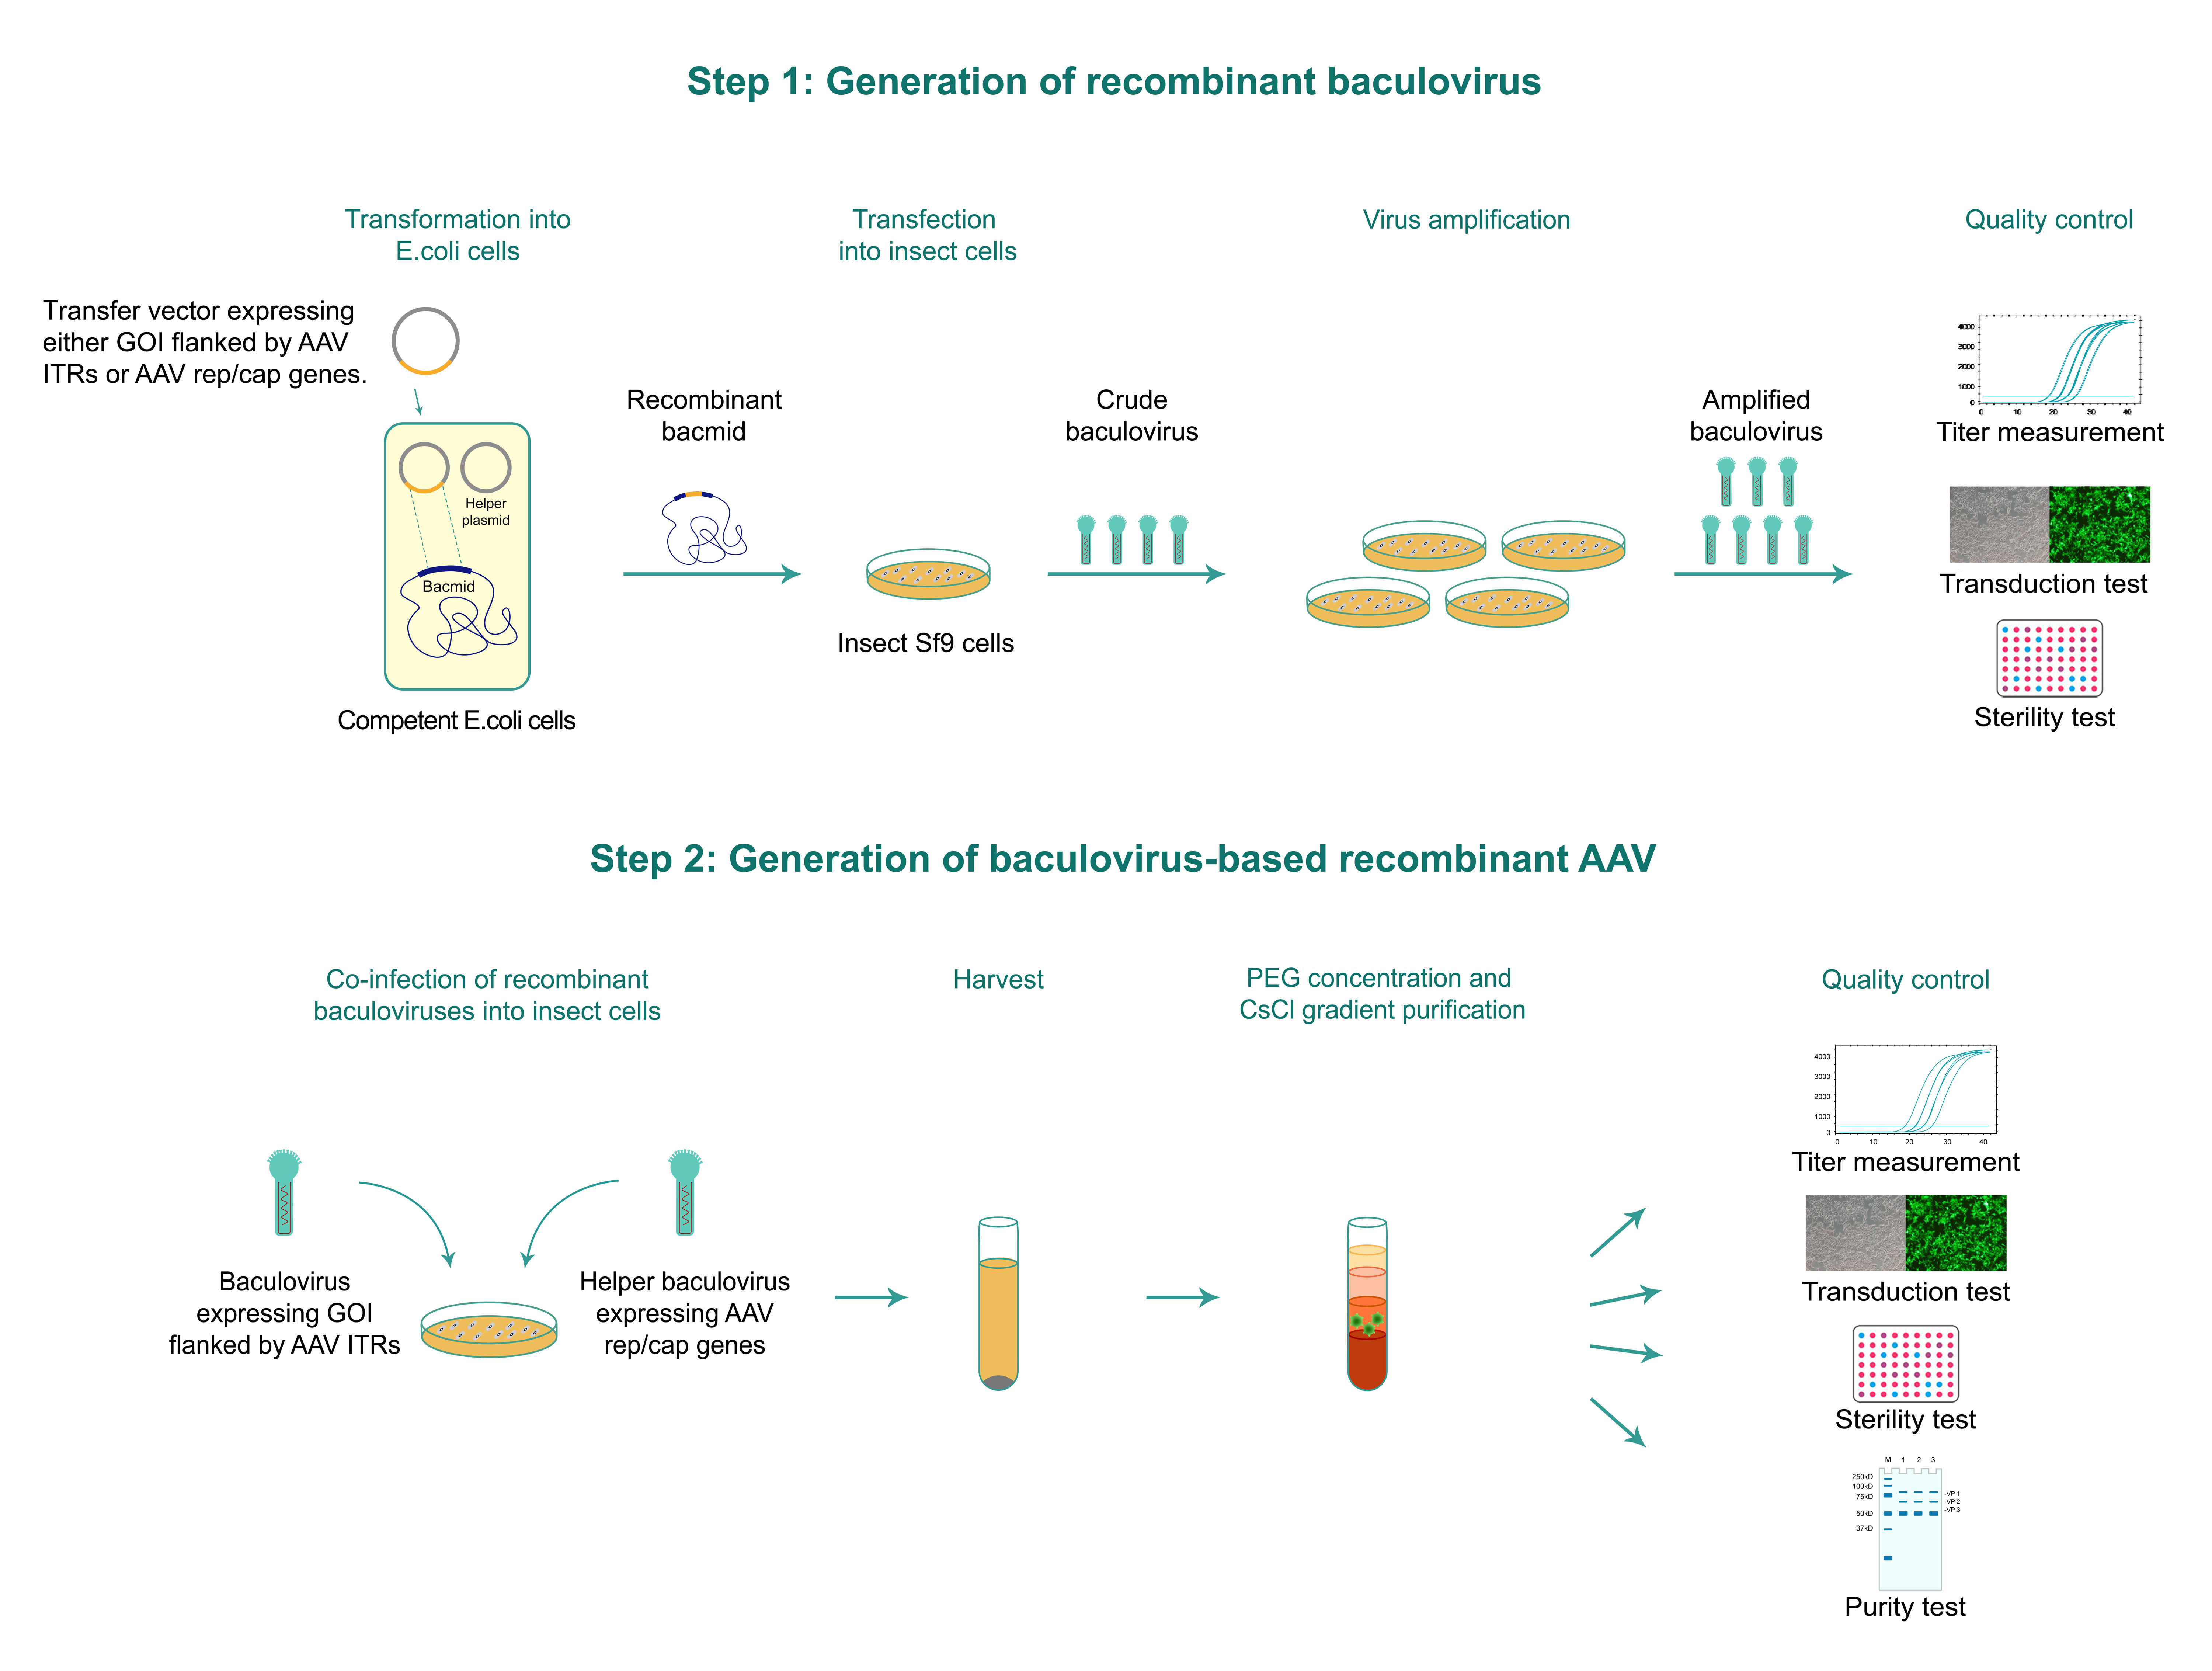 Typical workflow of baculovrius-based AAV packaging adn quality control.